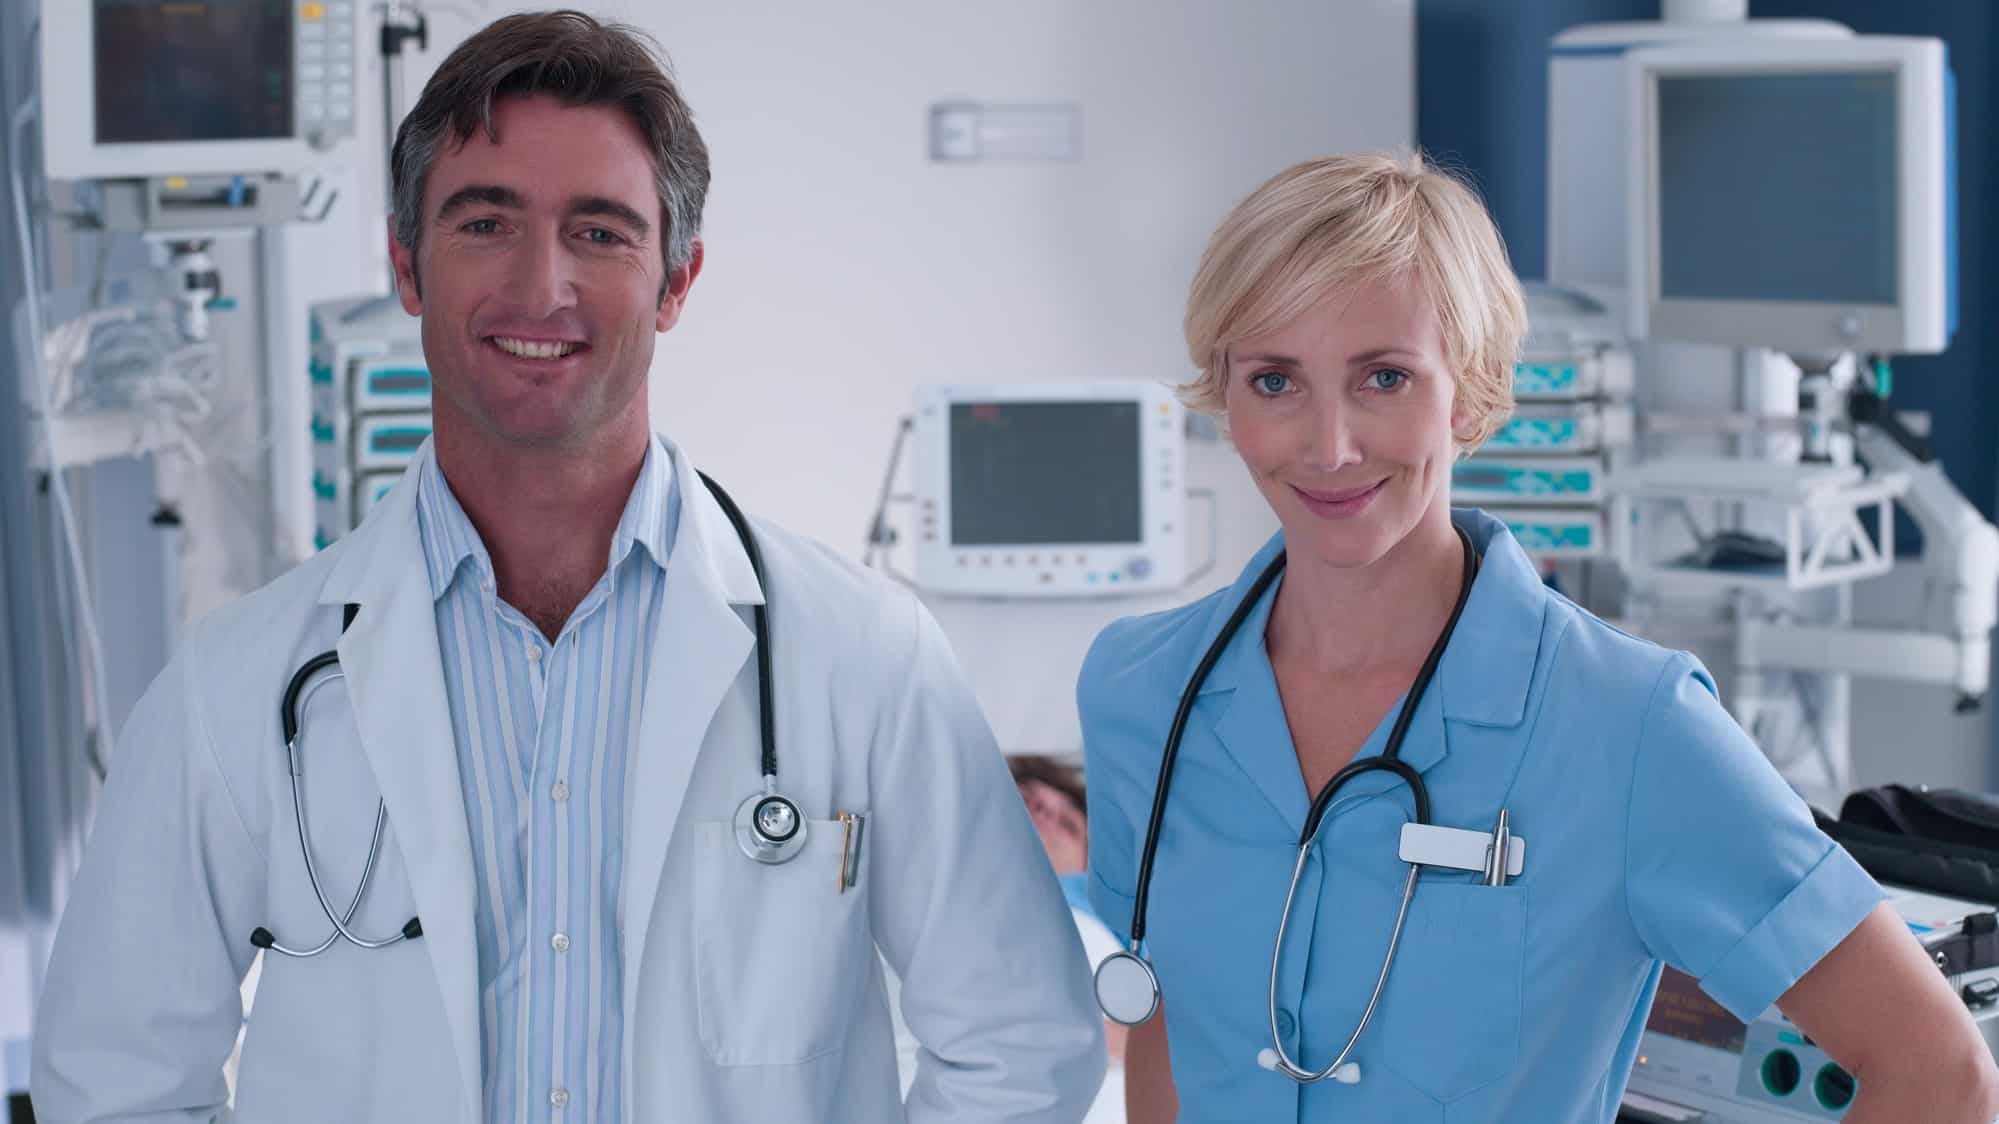 doctor and nurse smiling in a hospital ward representing rising share price